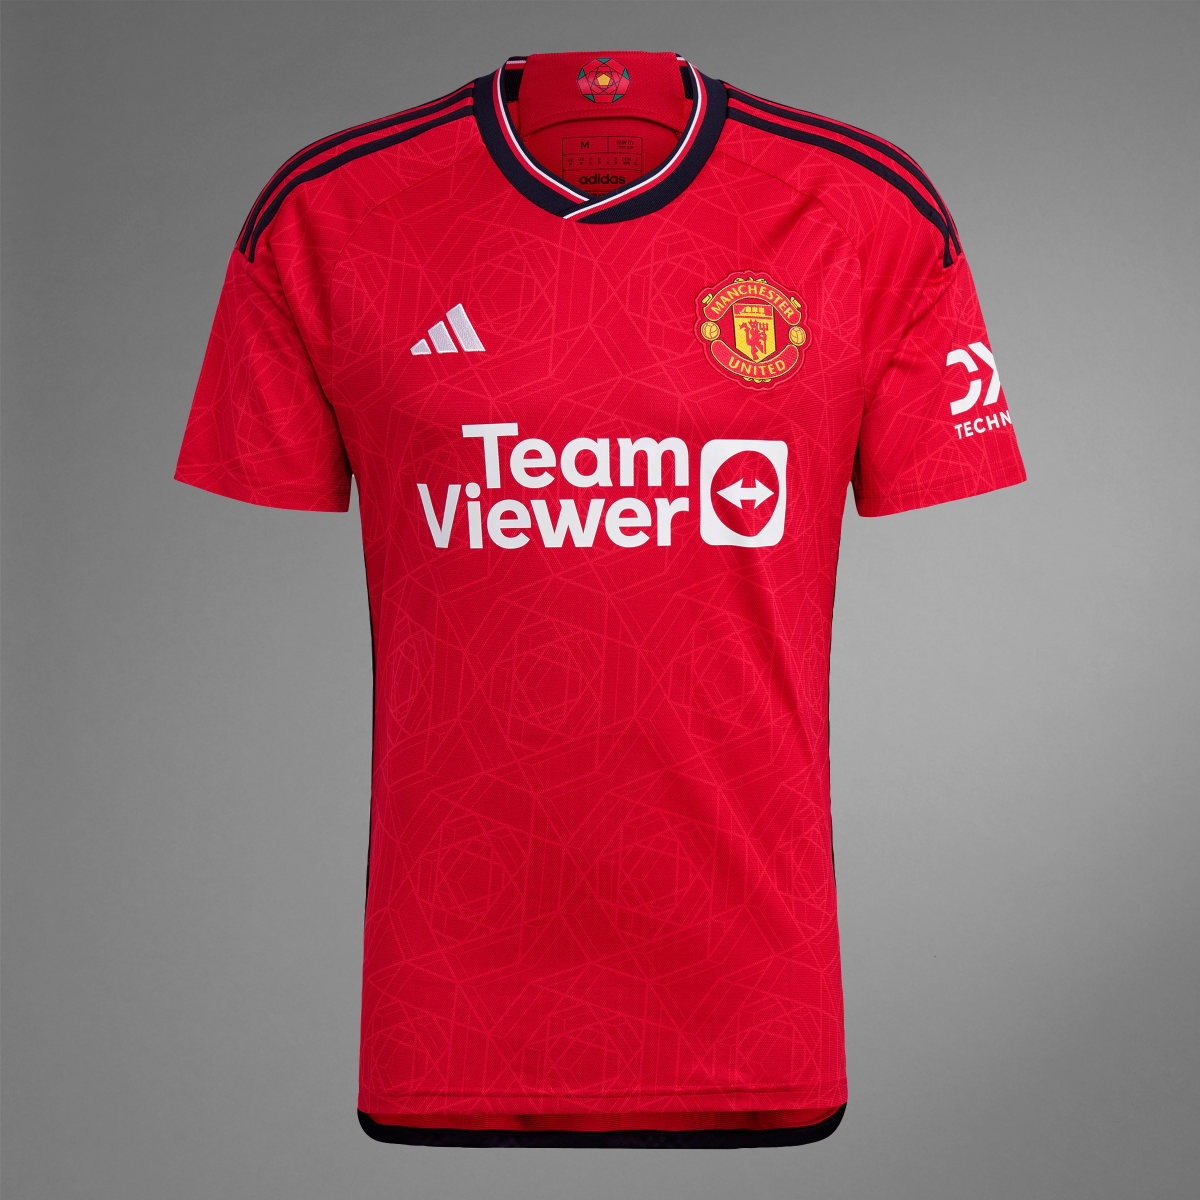 Adidas Manchester United 23/24 Home Jersey. 10